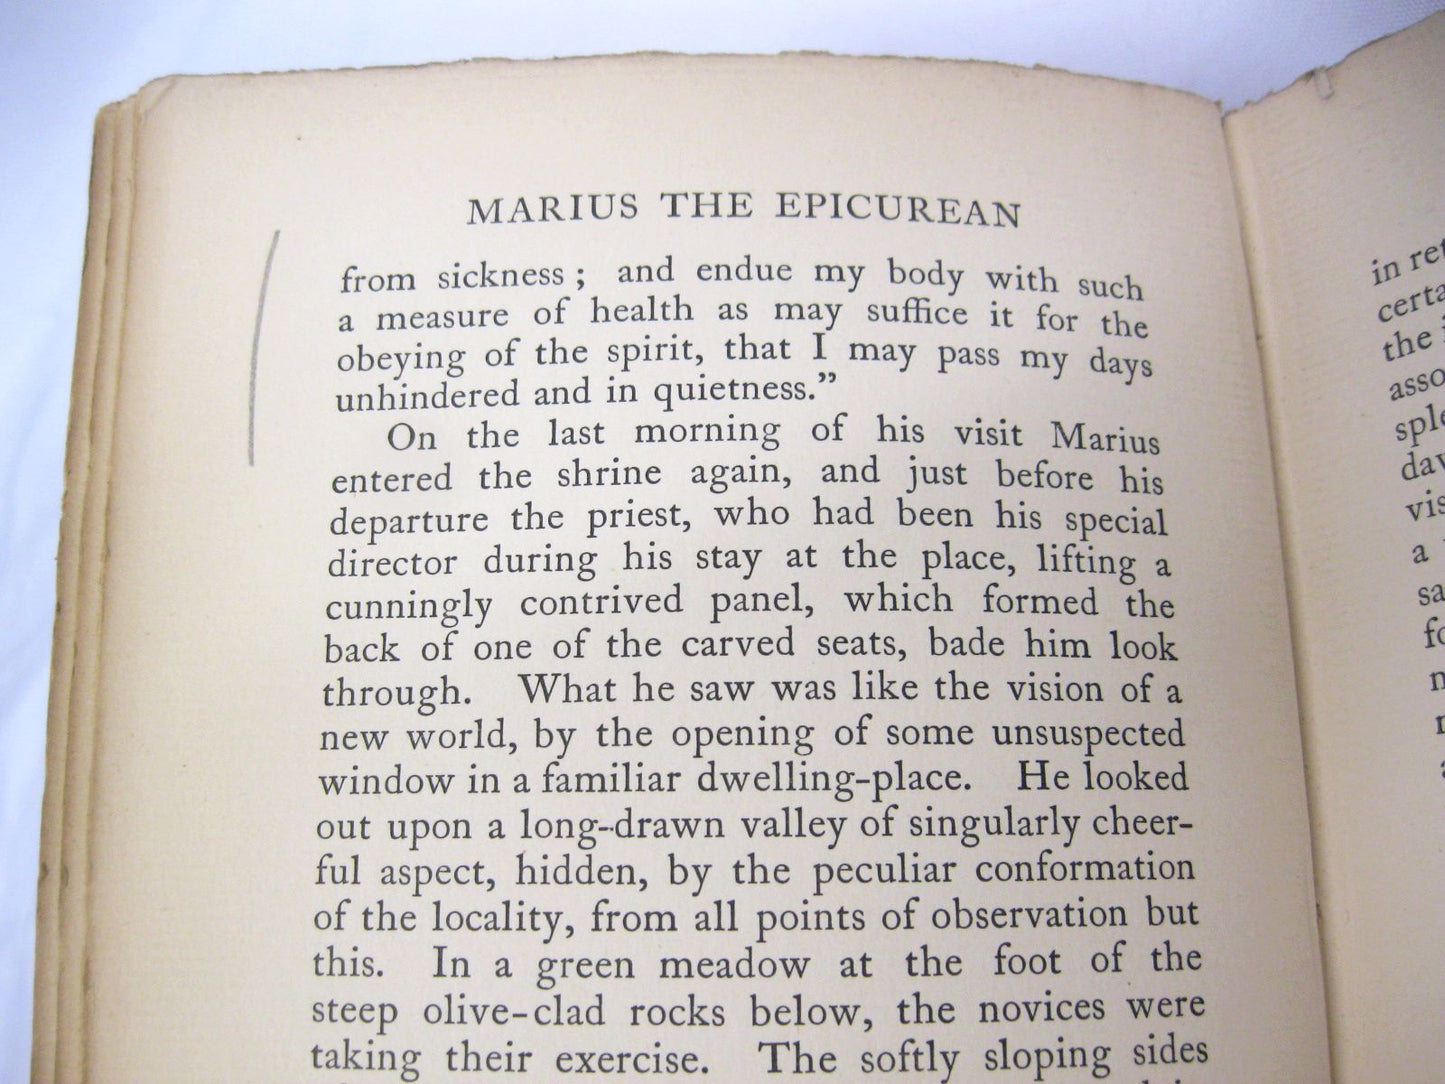 Marius the Epicurean by Walter Pater [owned by Marie Stopes]